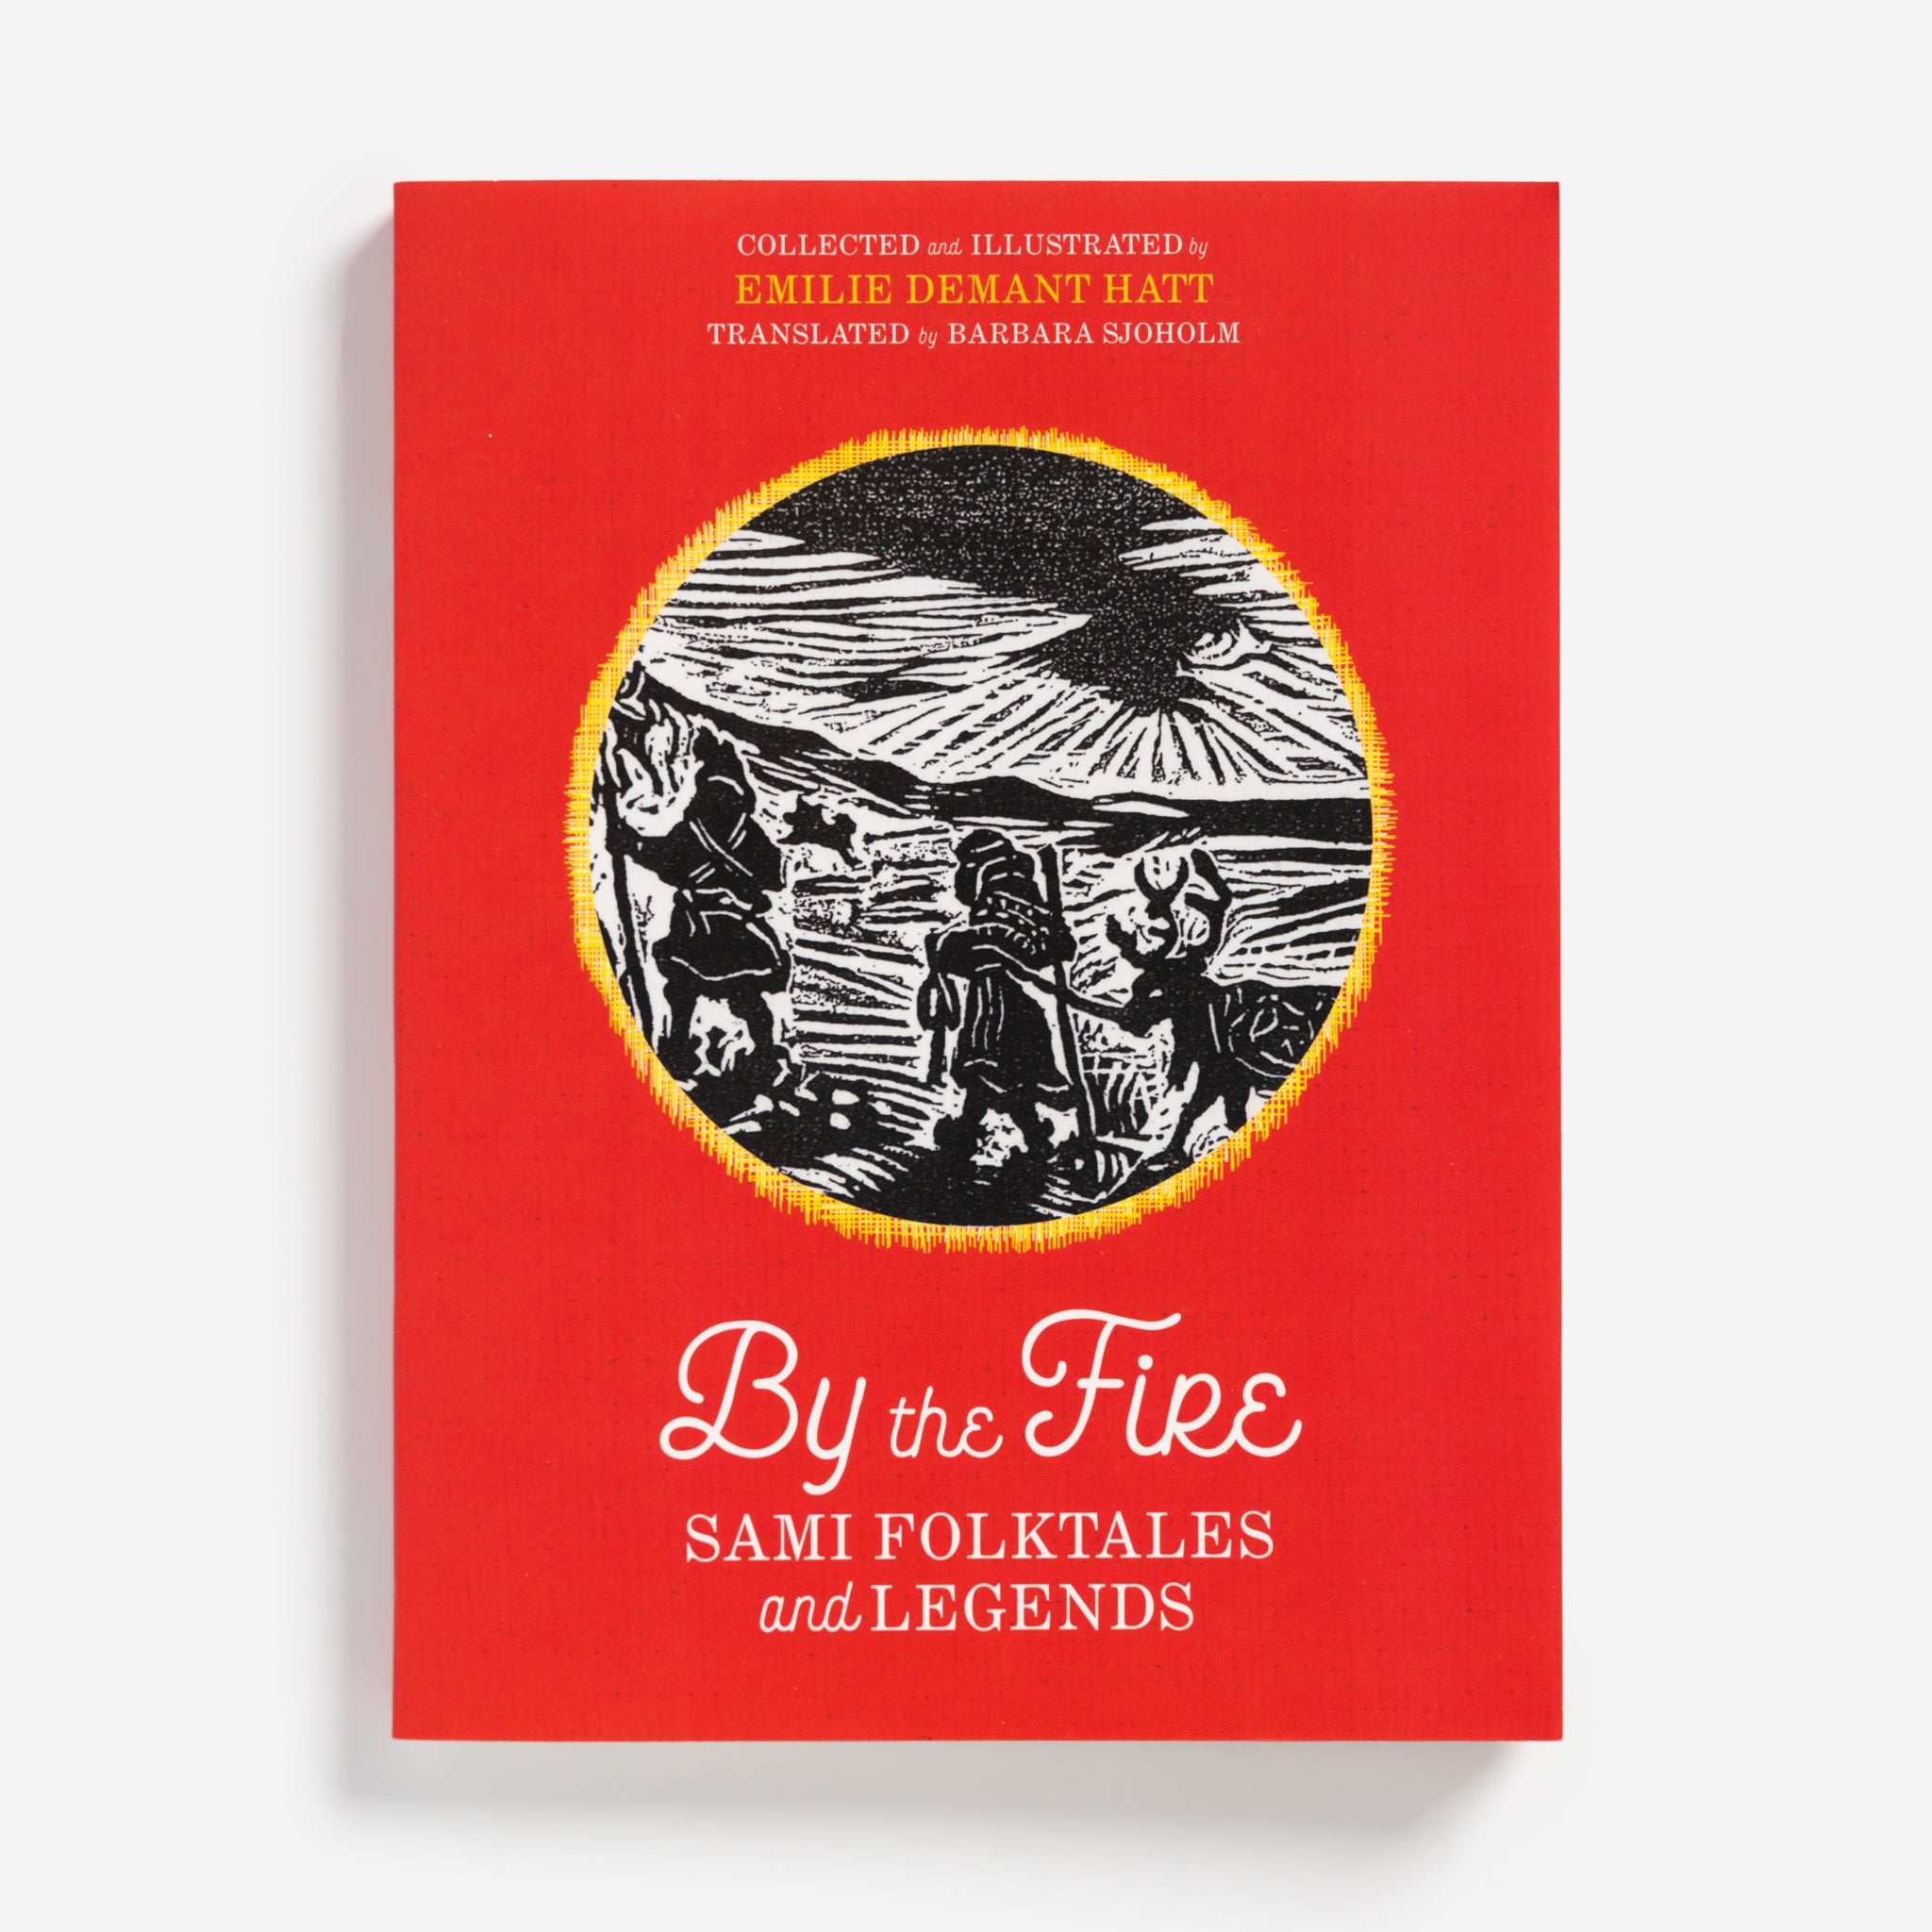 By the Fire: Sami Folktales and Legends - Collected by Emilie Demant Hatt